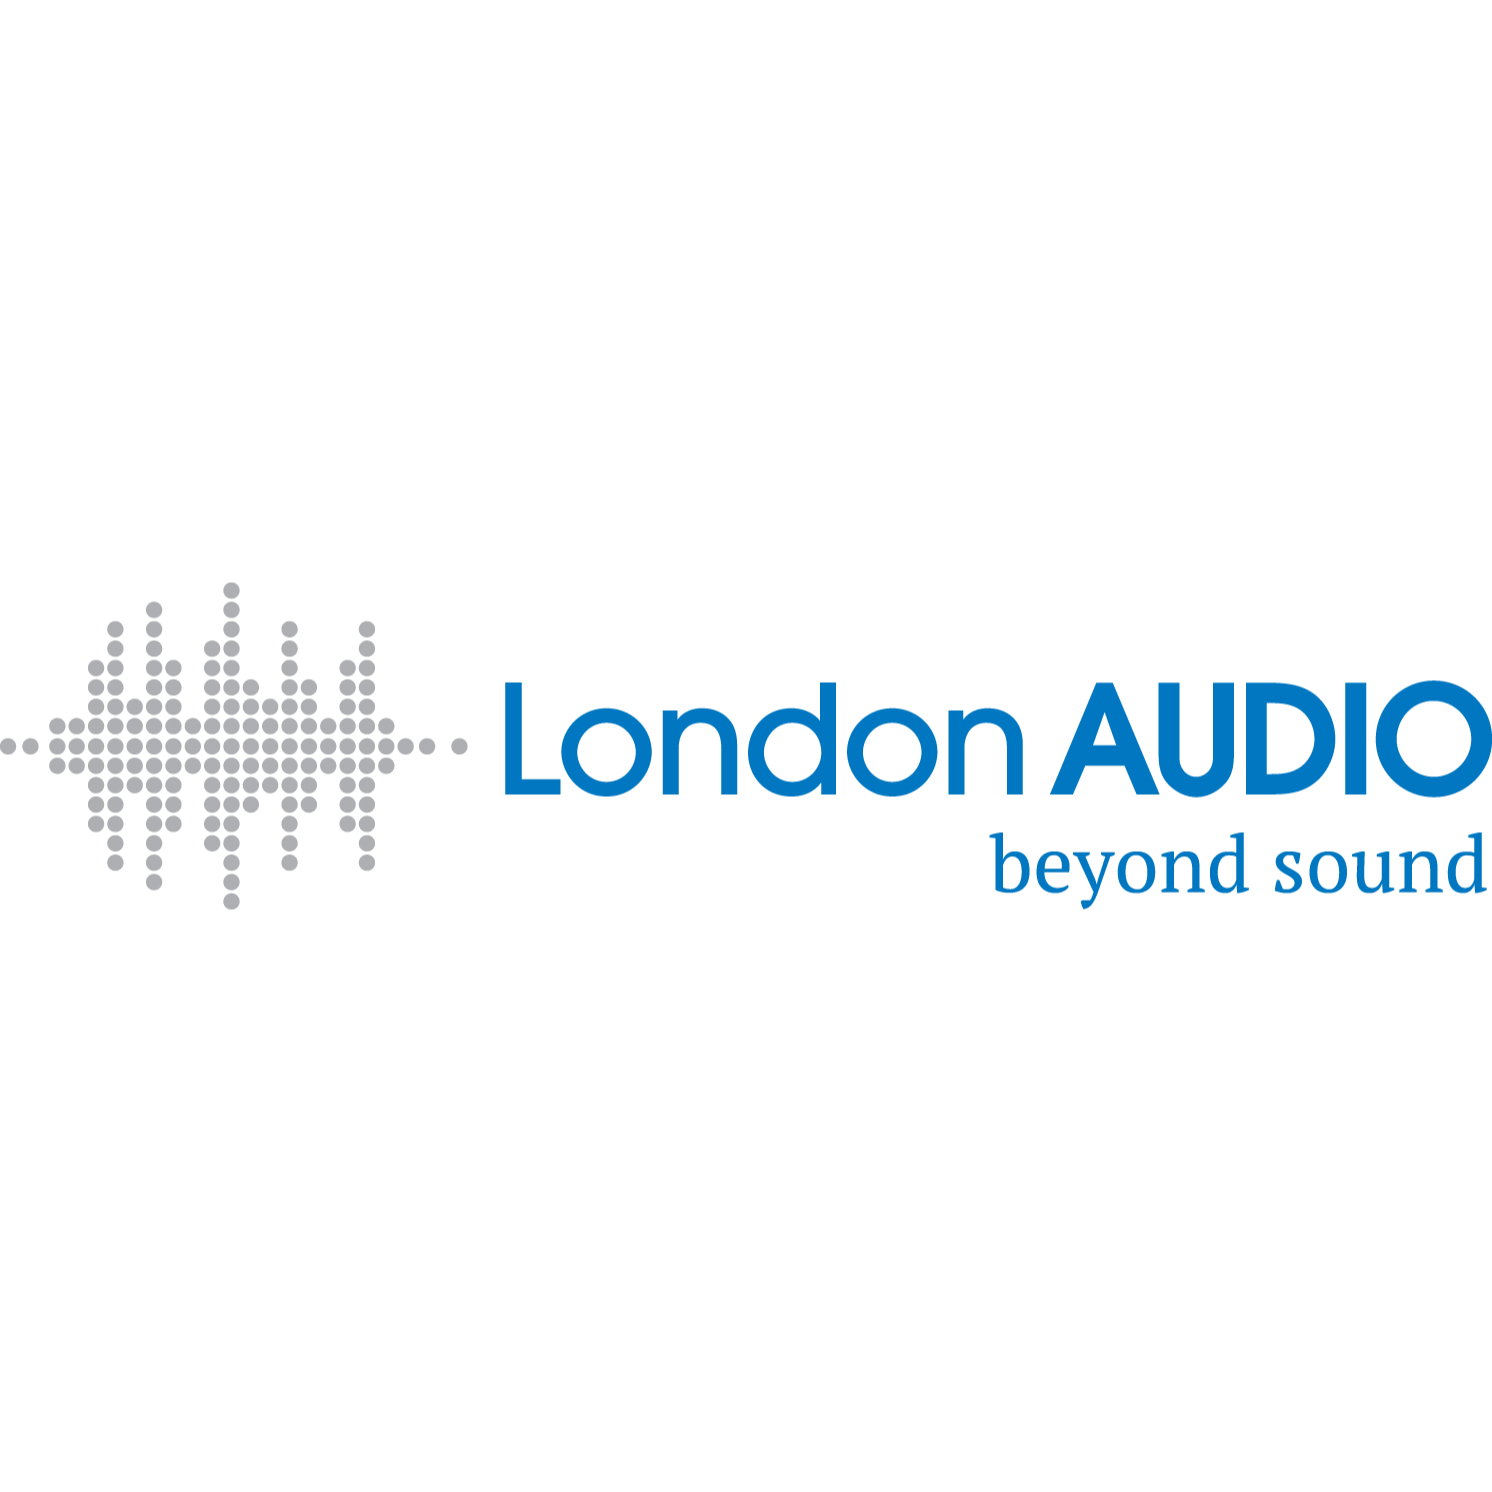 London Audio - Stereo Equipment Sales & Services